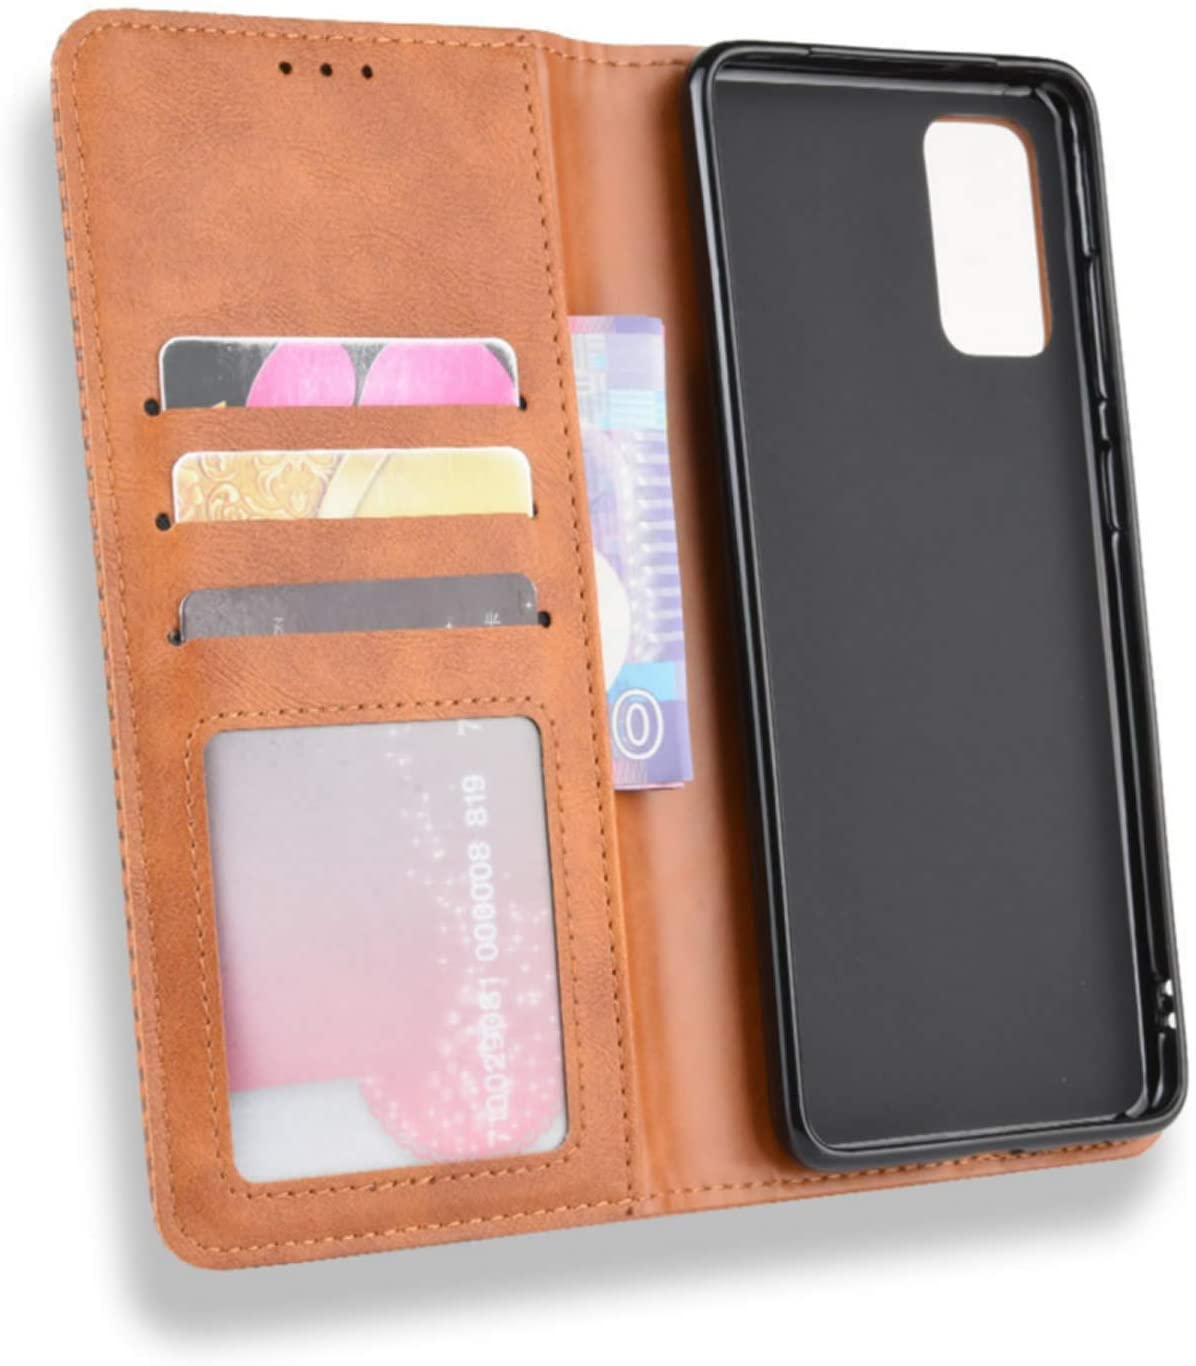 Samsung Galaxy S20 FE full body protection Leather Wallet flip case cover by Excelsior